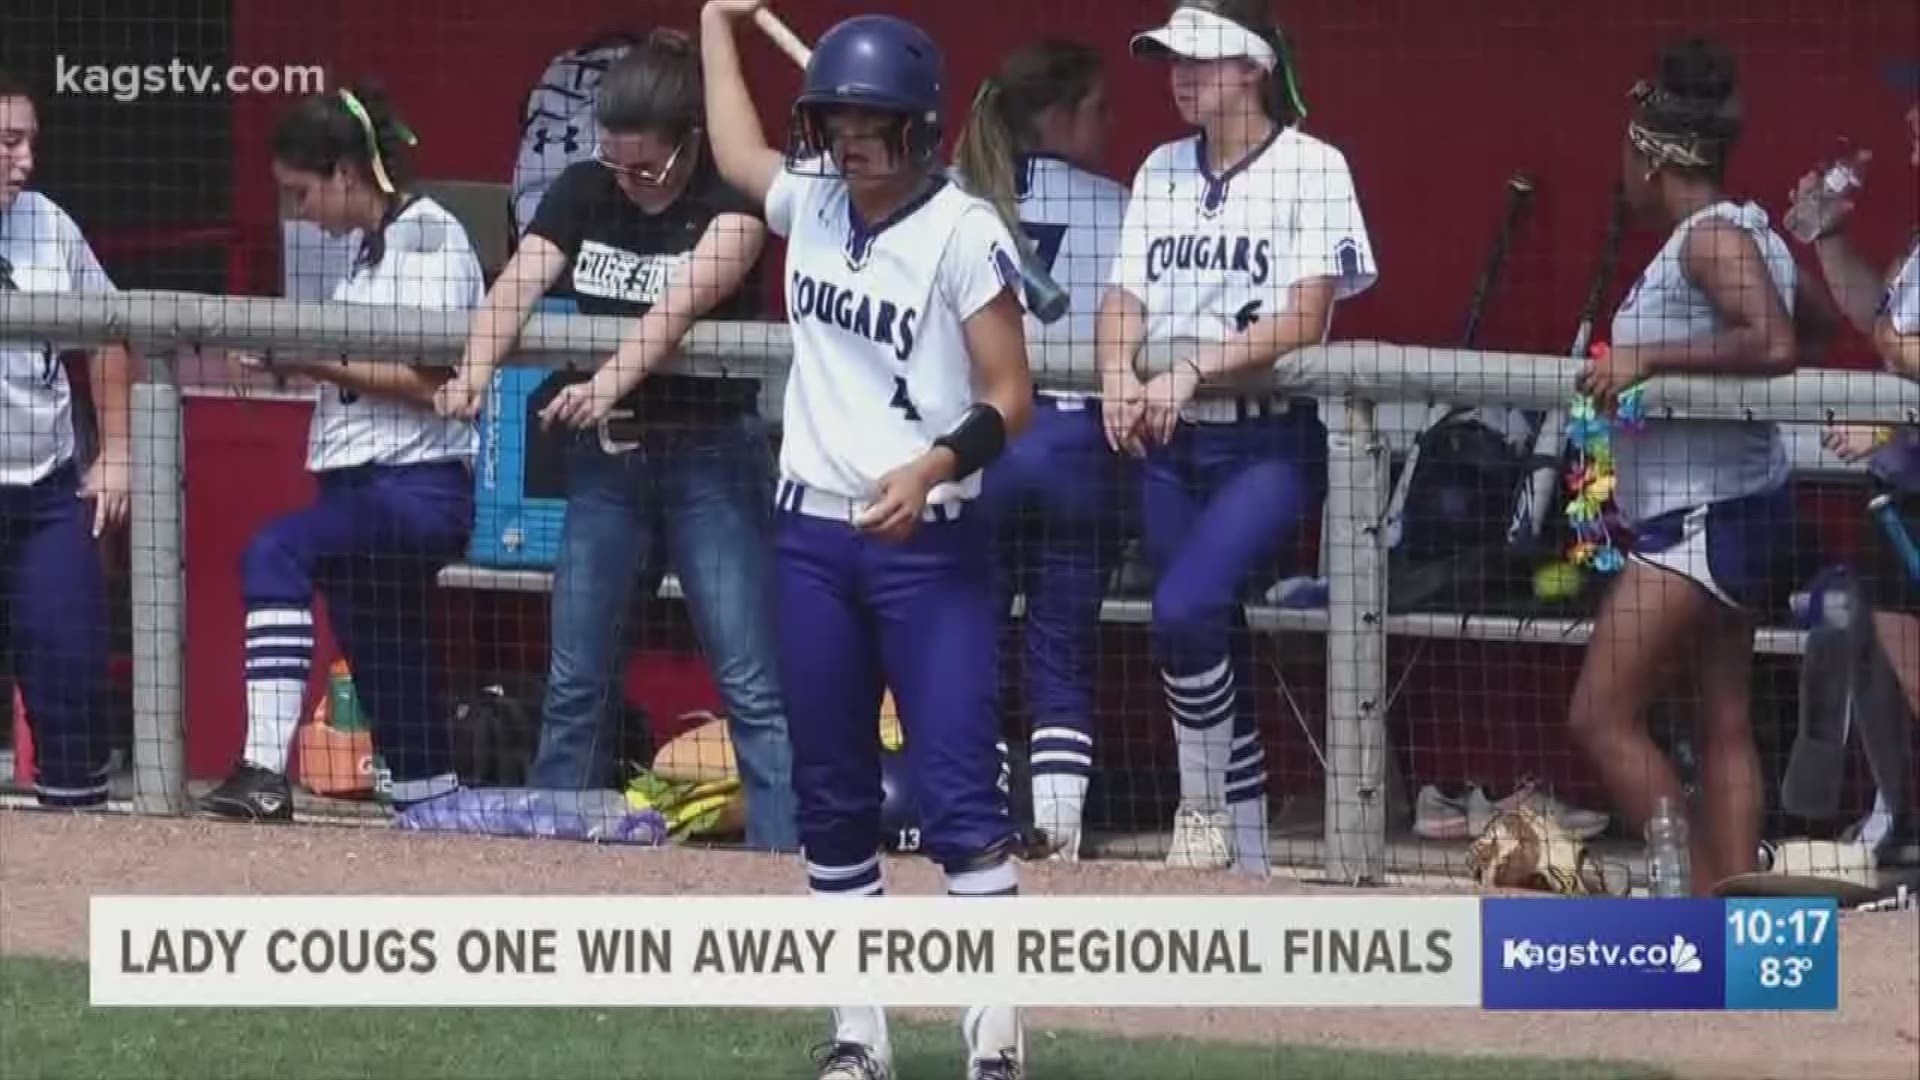 College Station dropped 2 games on Saturday, 3-2 and 4-1 to Barbers Hill, as the Lady Cougars were eliminated in the Regional Semifinals.